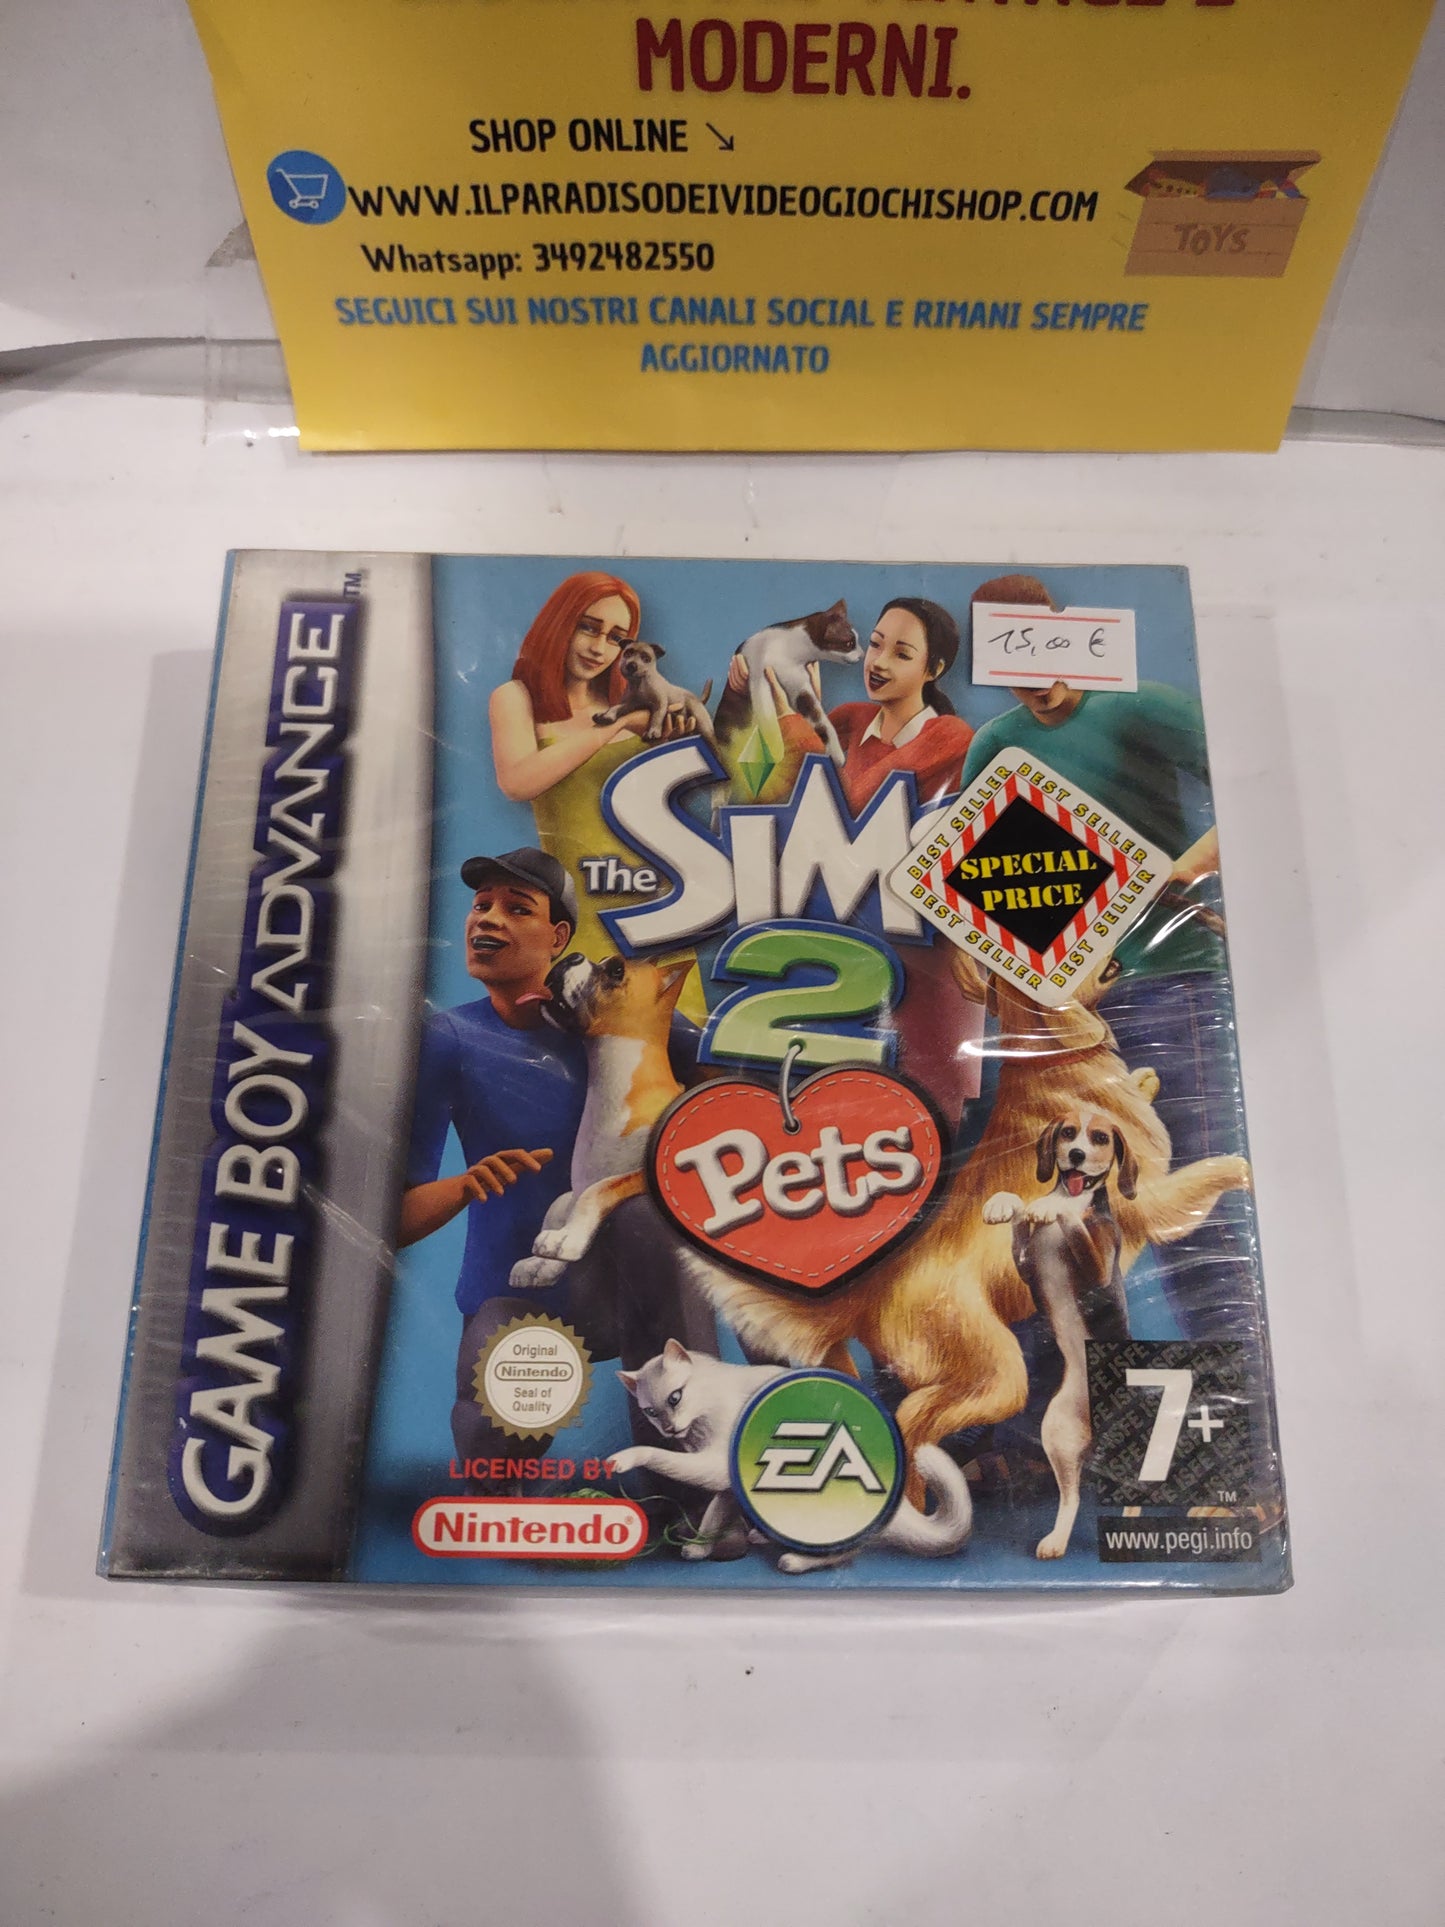 Gioco GBA Gameboy the Sims 2 Pets advance